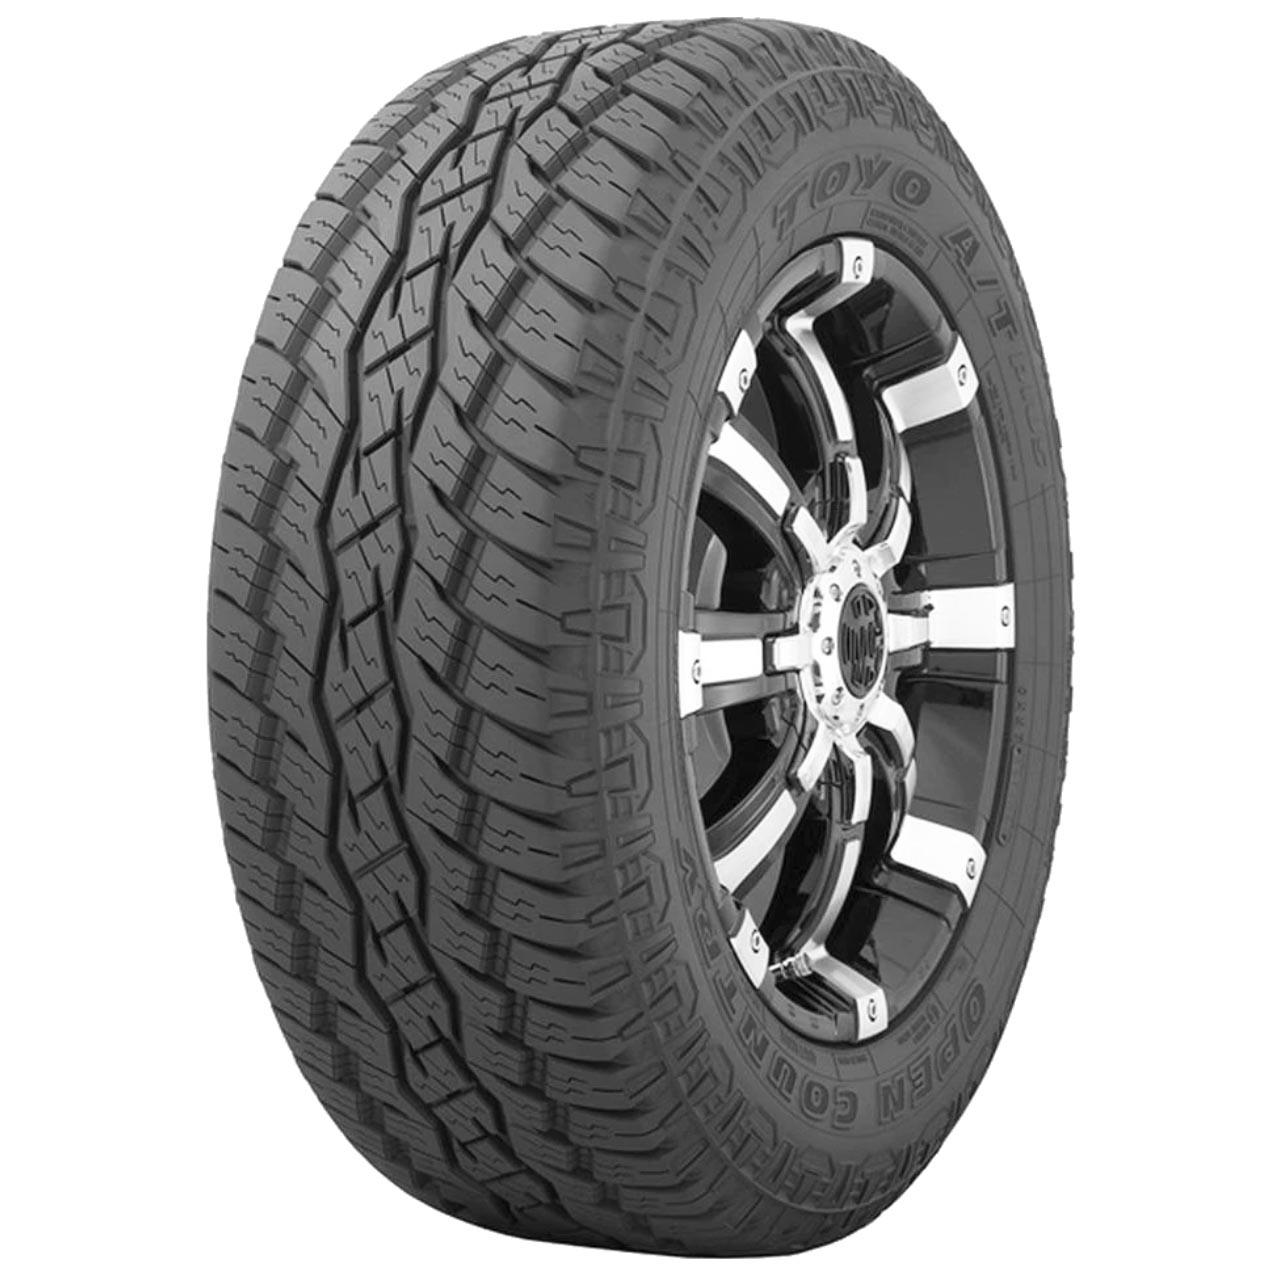 Toyo Open Country AT Plus 275/65R18C 113/110S